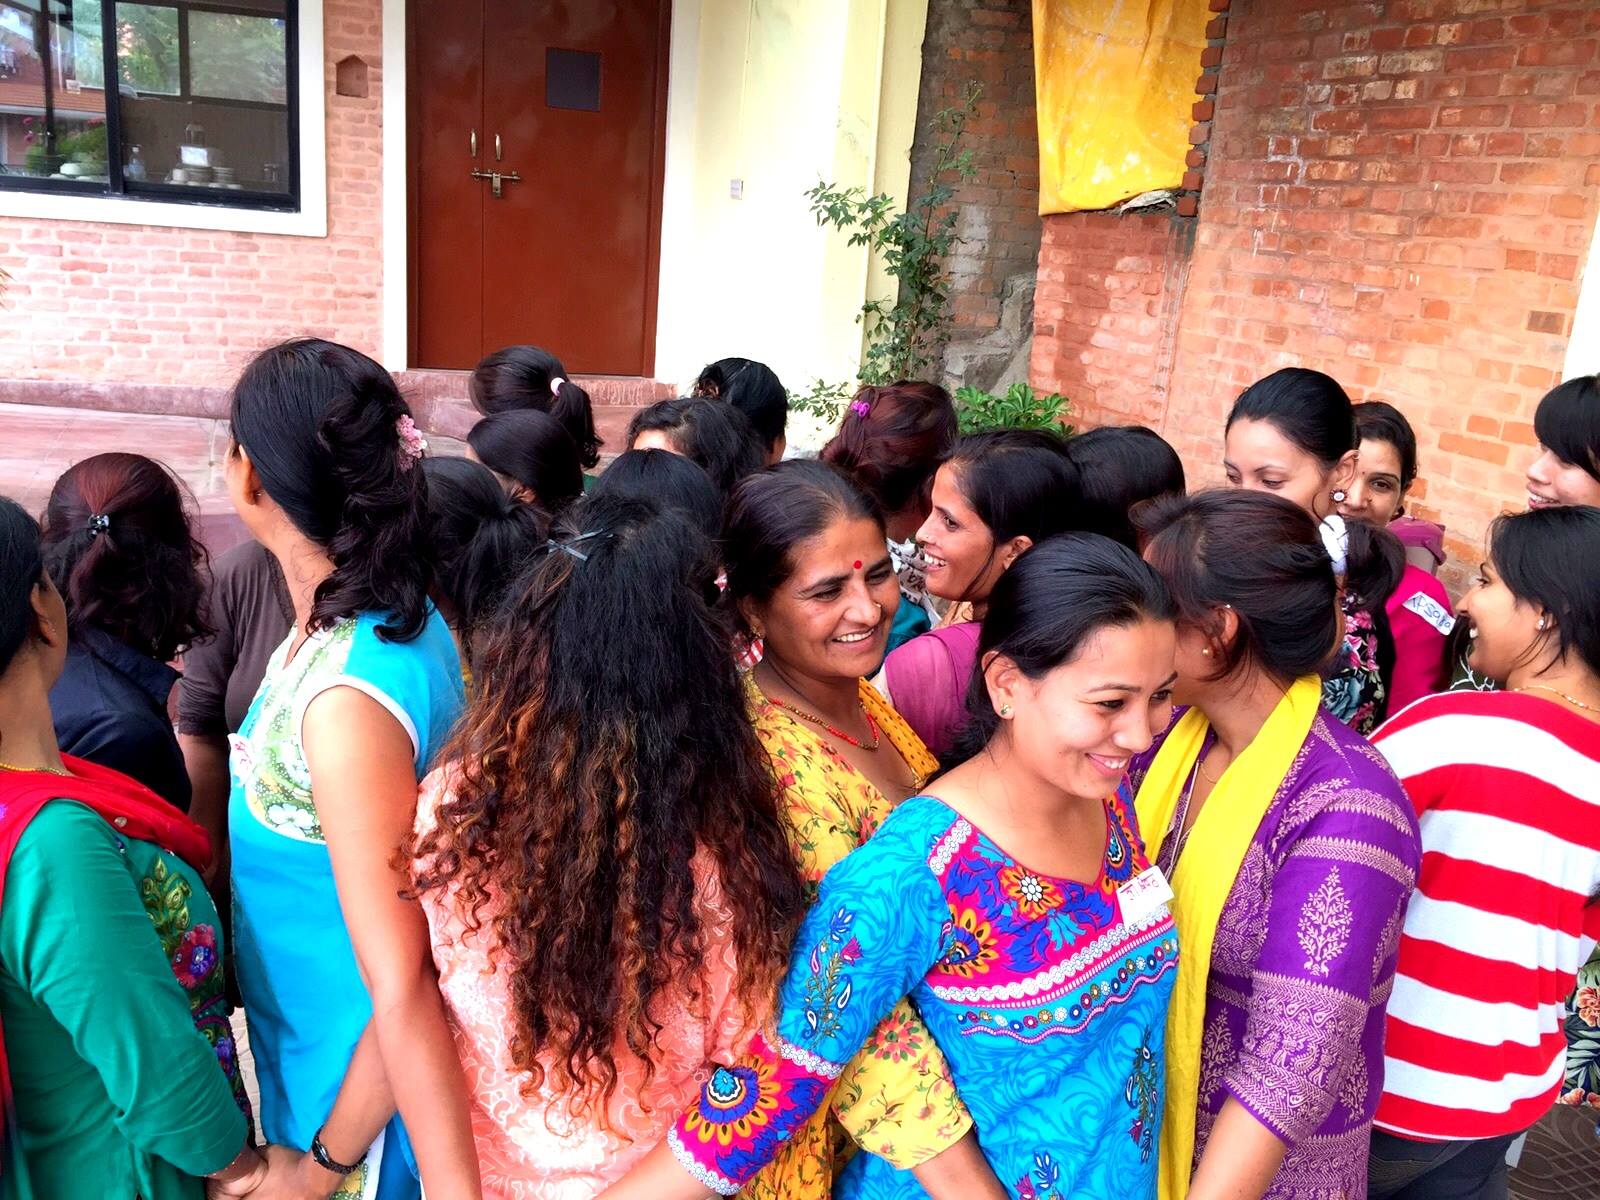 Team members of WORED Nepal participating in an activity